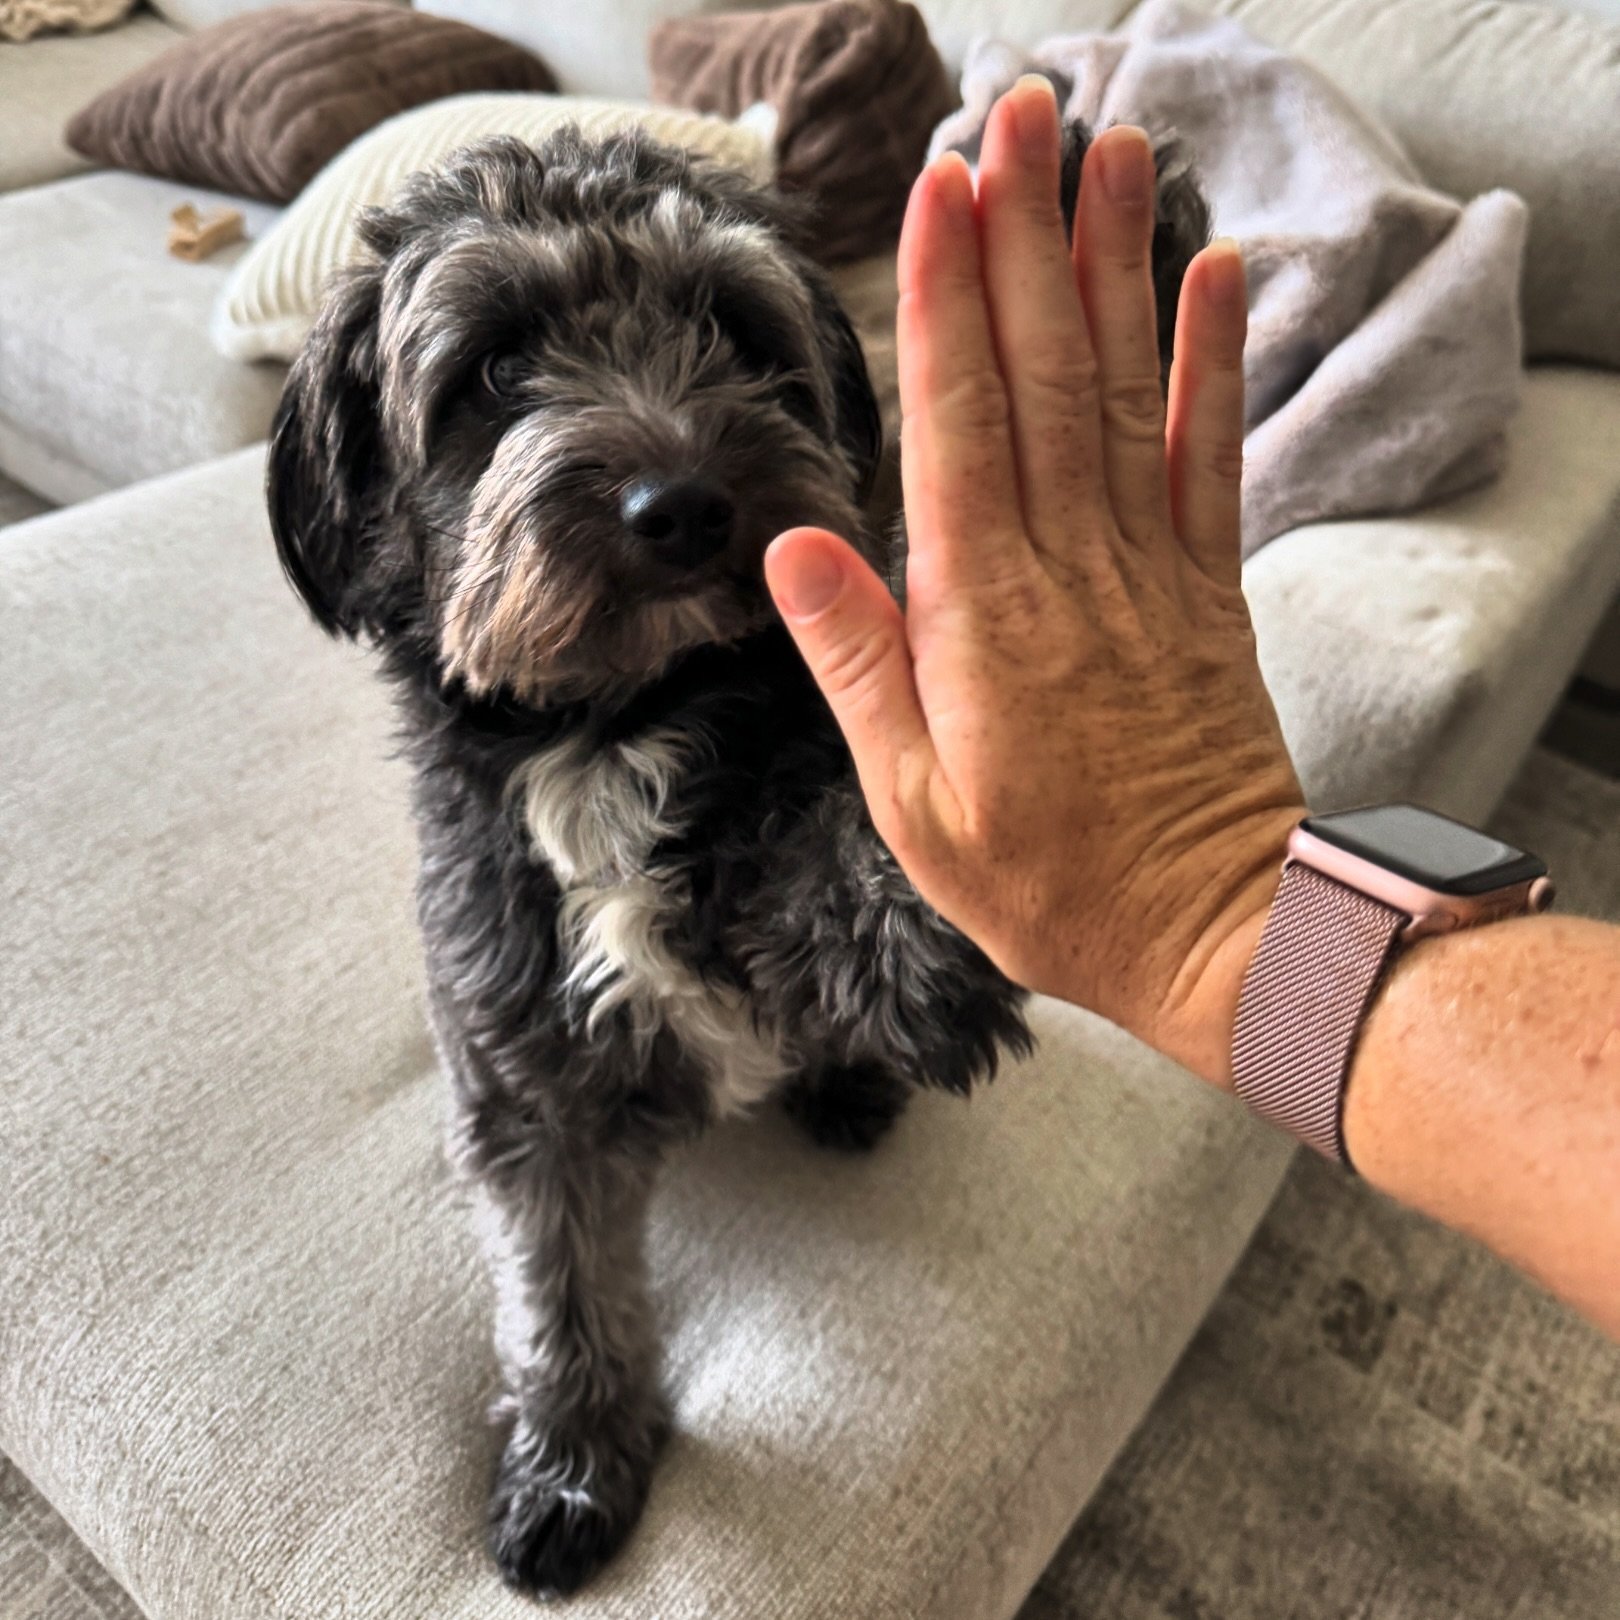 Zola: High-five for Friday, ammiright?